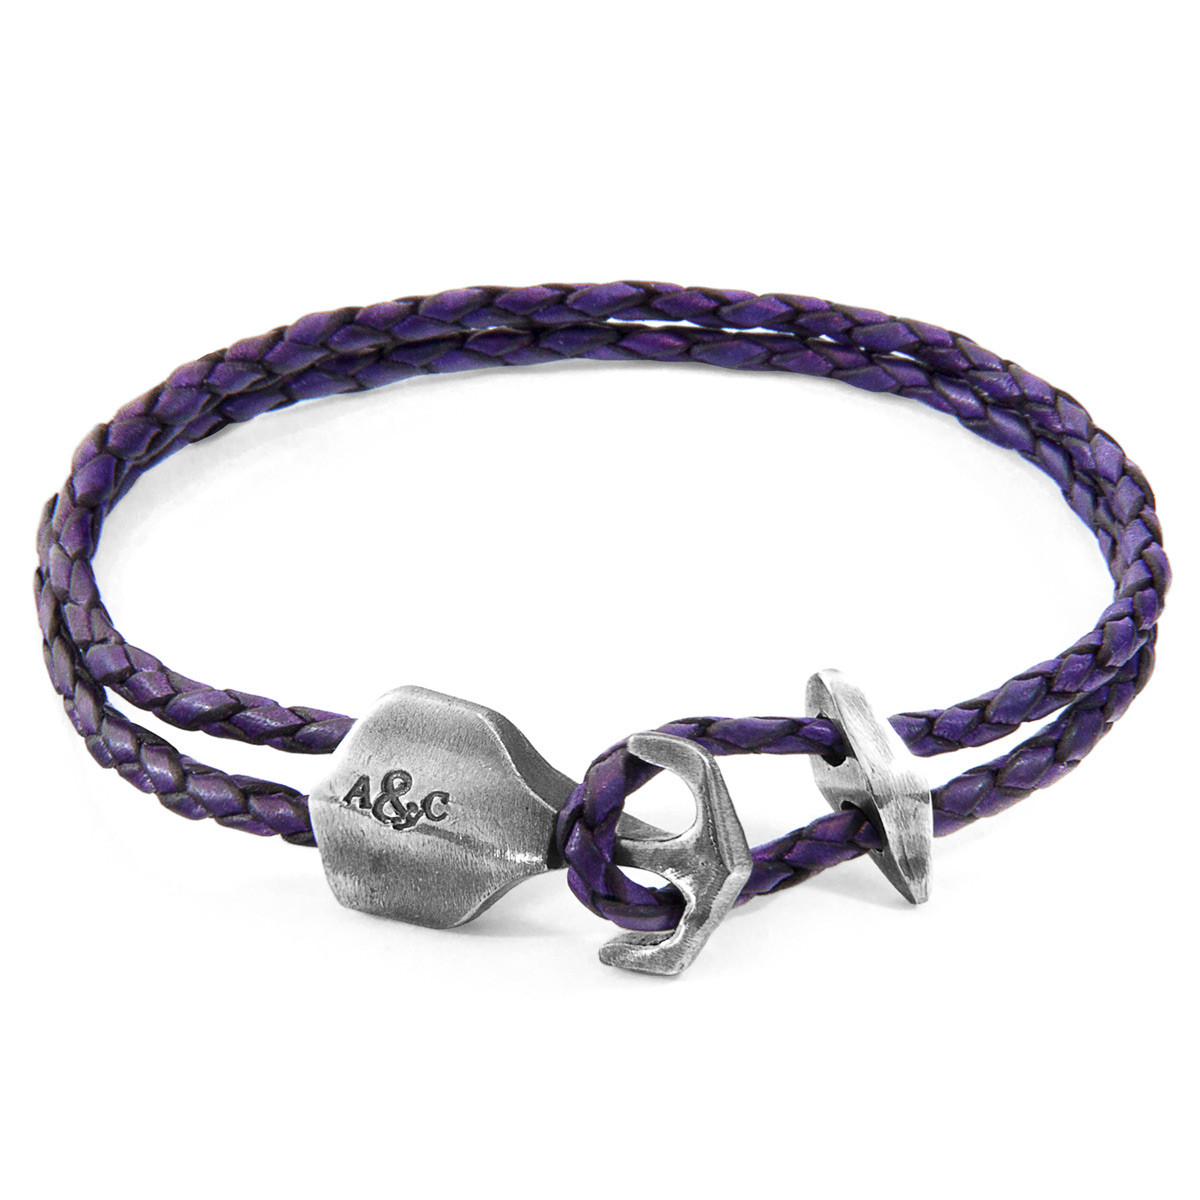 Anchor & Crew Grape Purple Delta Anchor Silver and Braided Leather Bracelet